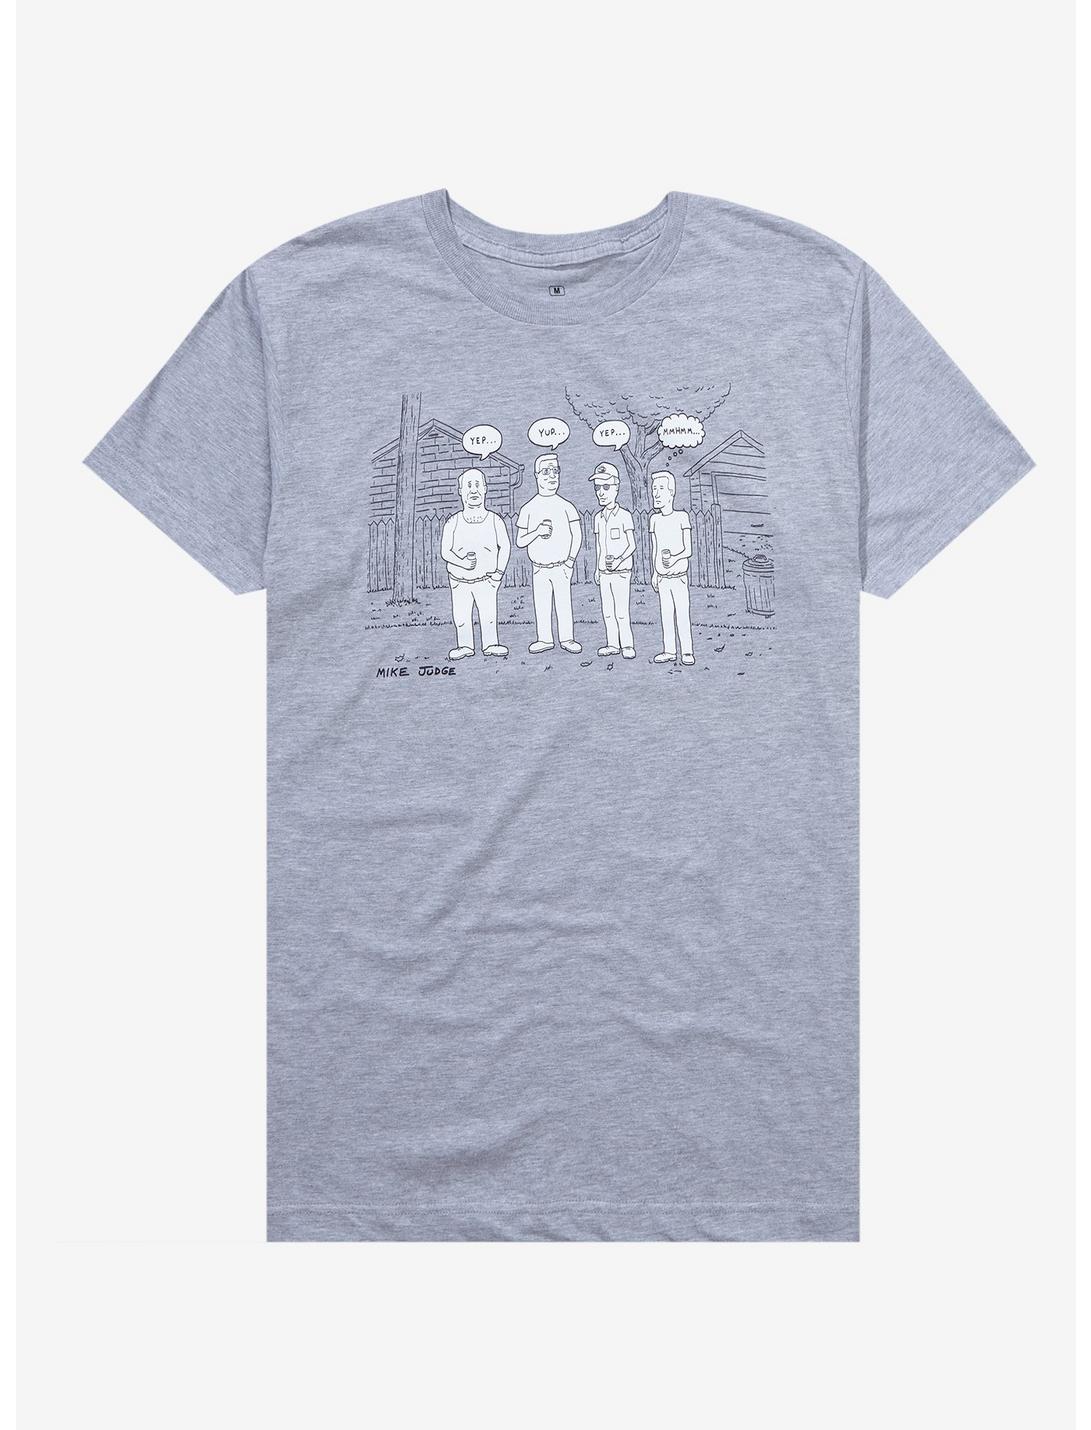 King of The Hill Group Portrait T-Shirt - BoxLunch Exclusive, HEATHER GREY, hi-res